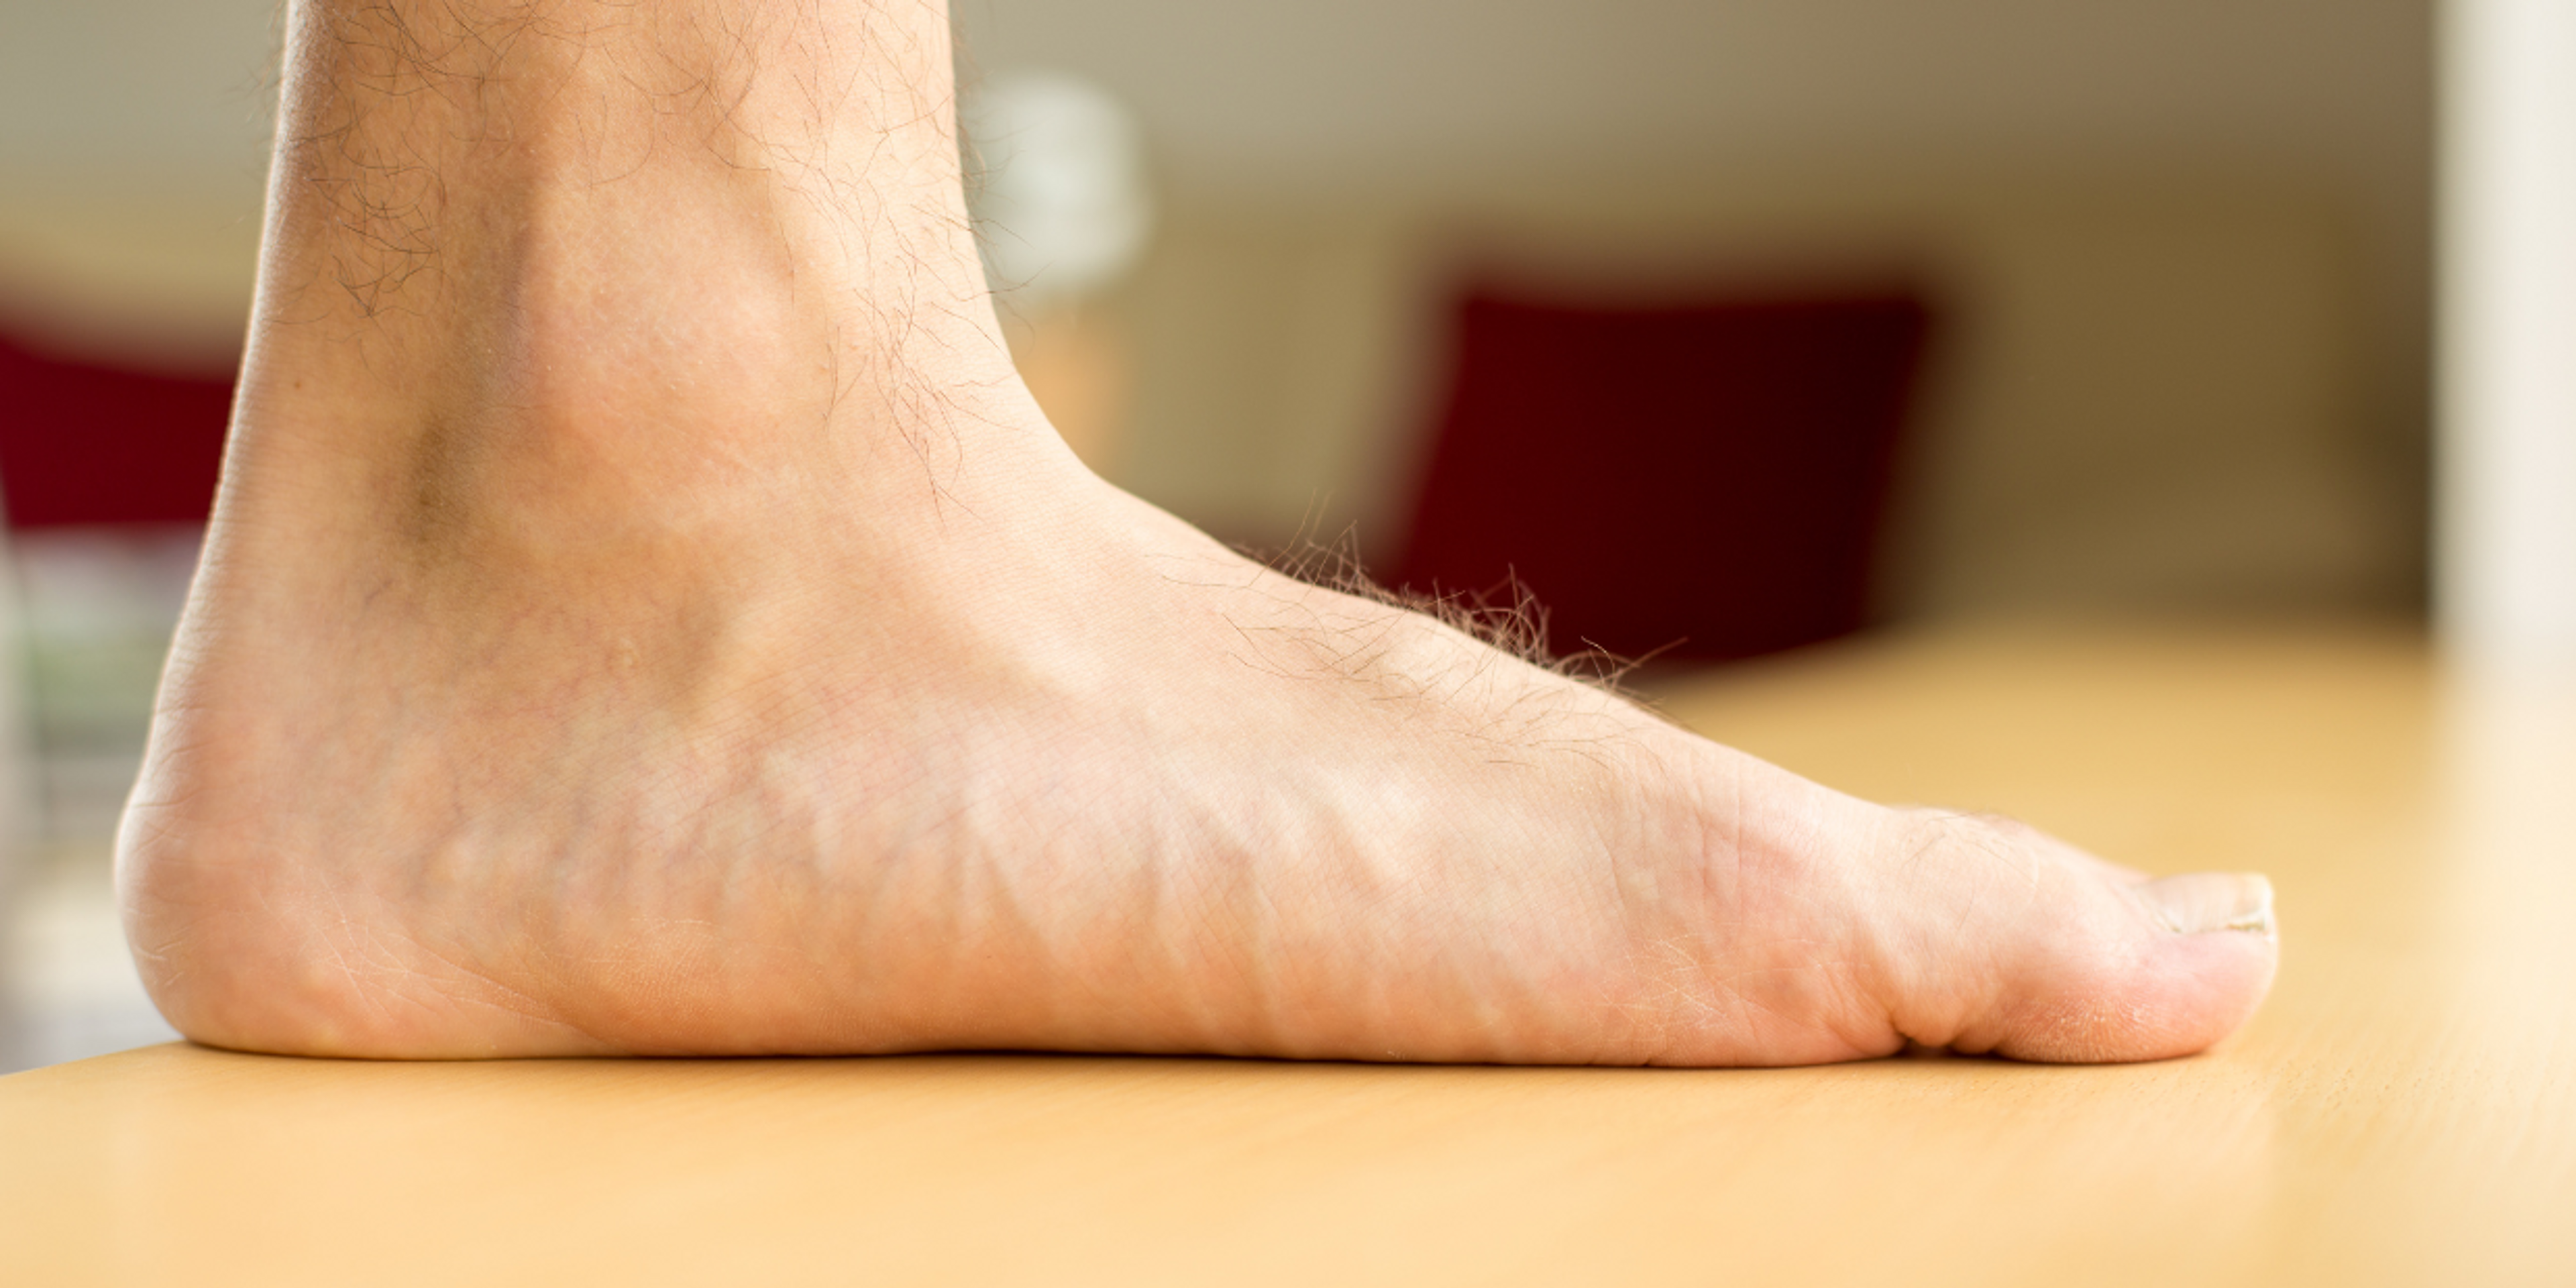 Flat feet can predispose you to developing plantar fasciitis and you may benefit from custom insoles if you have this foot shape.